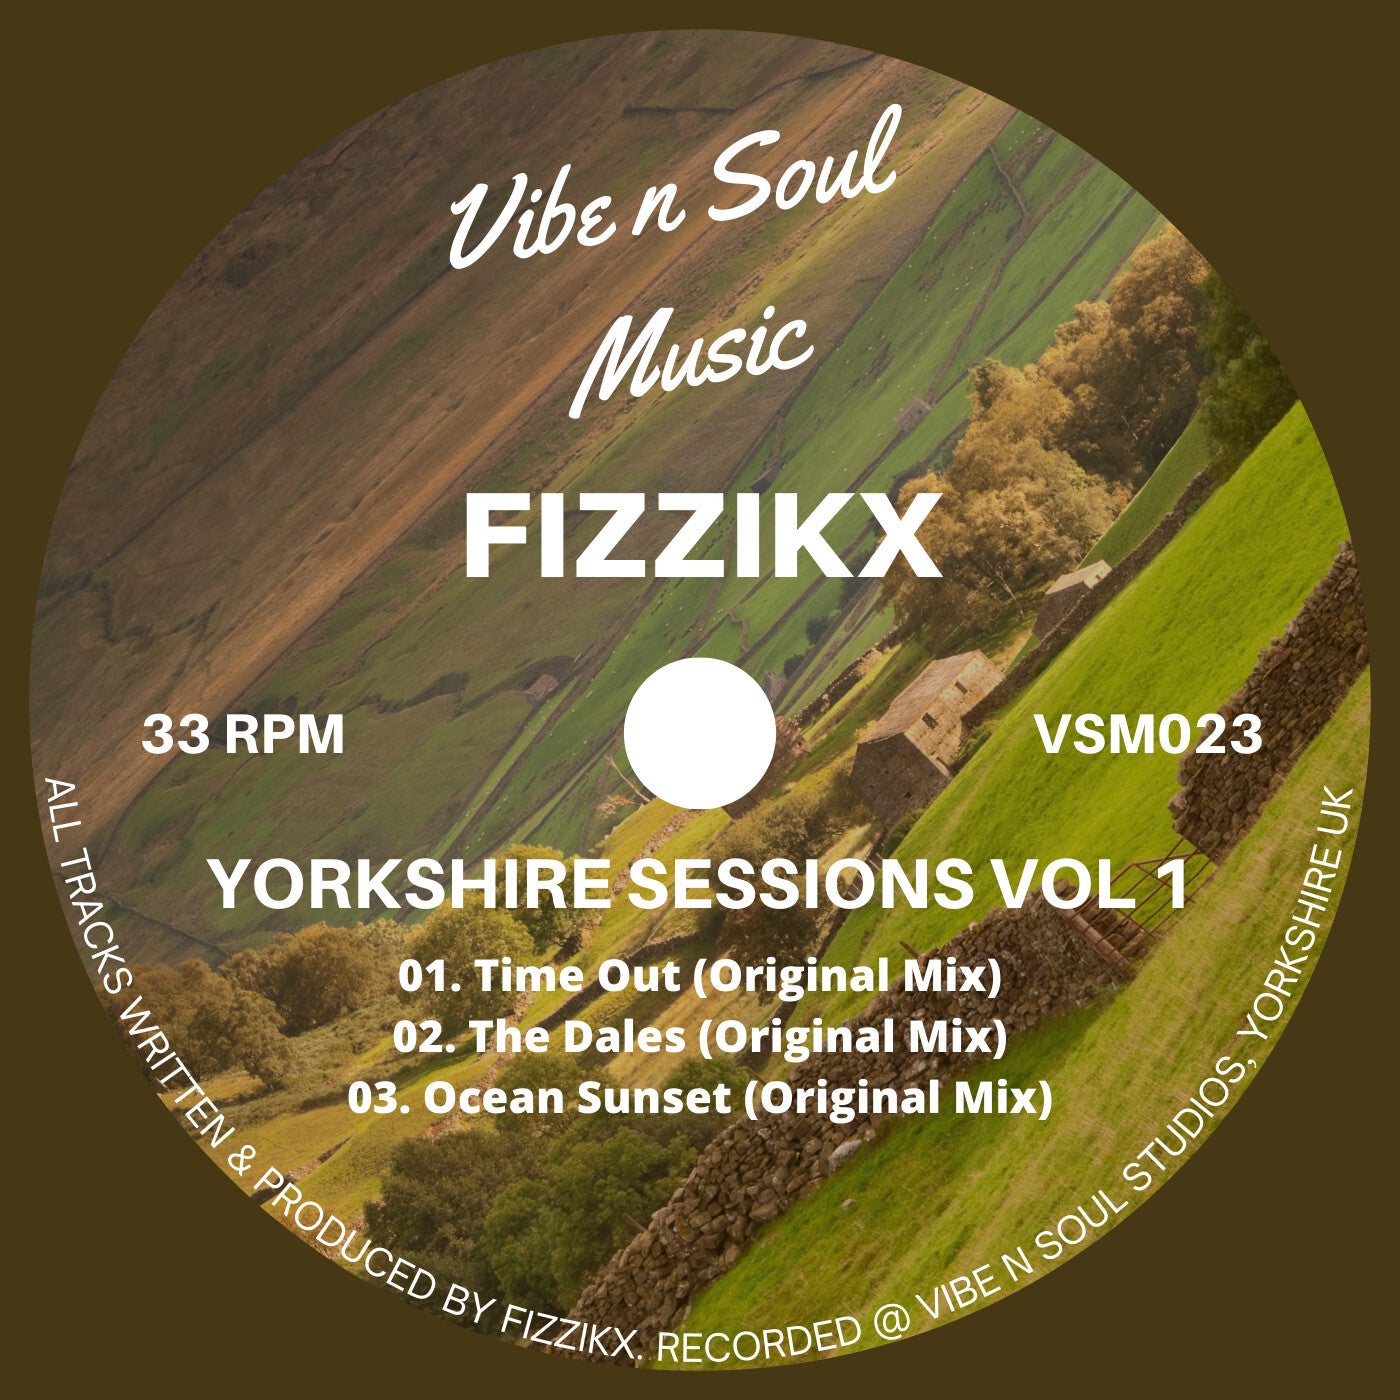 Yorkshire Sessions Vol 1